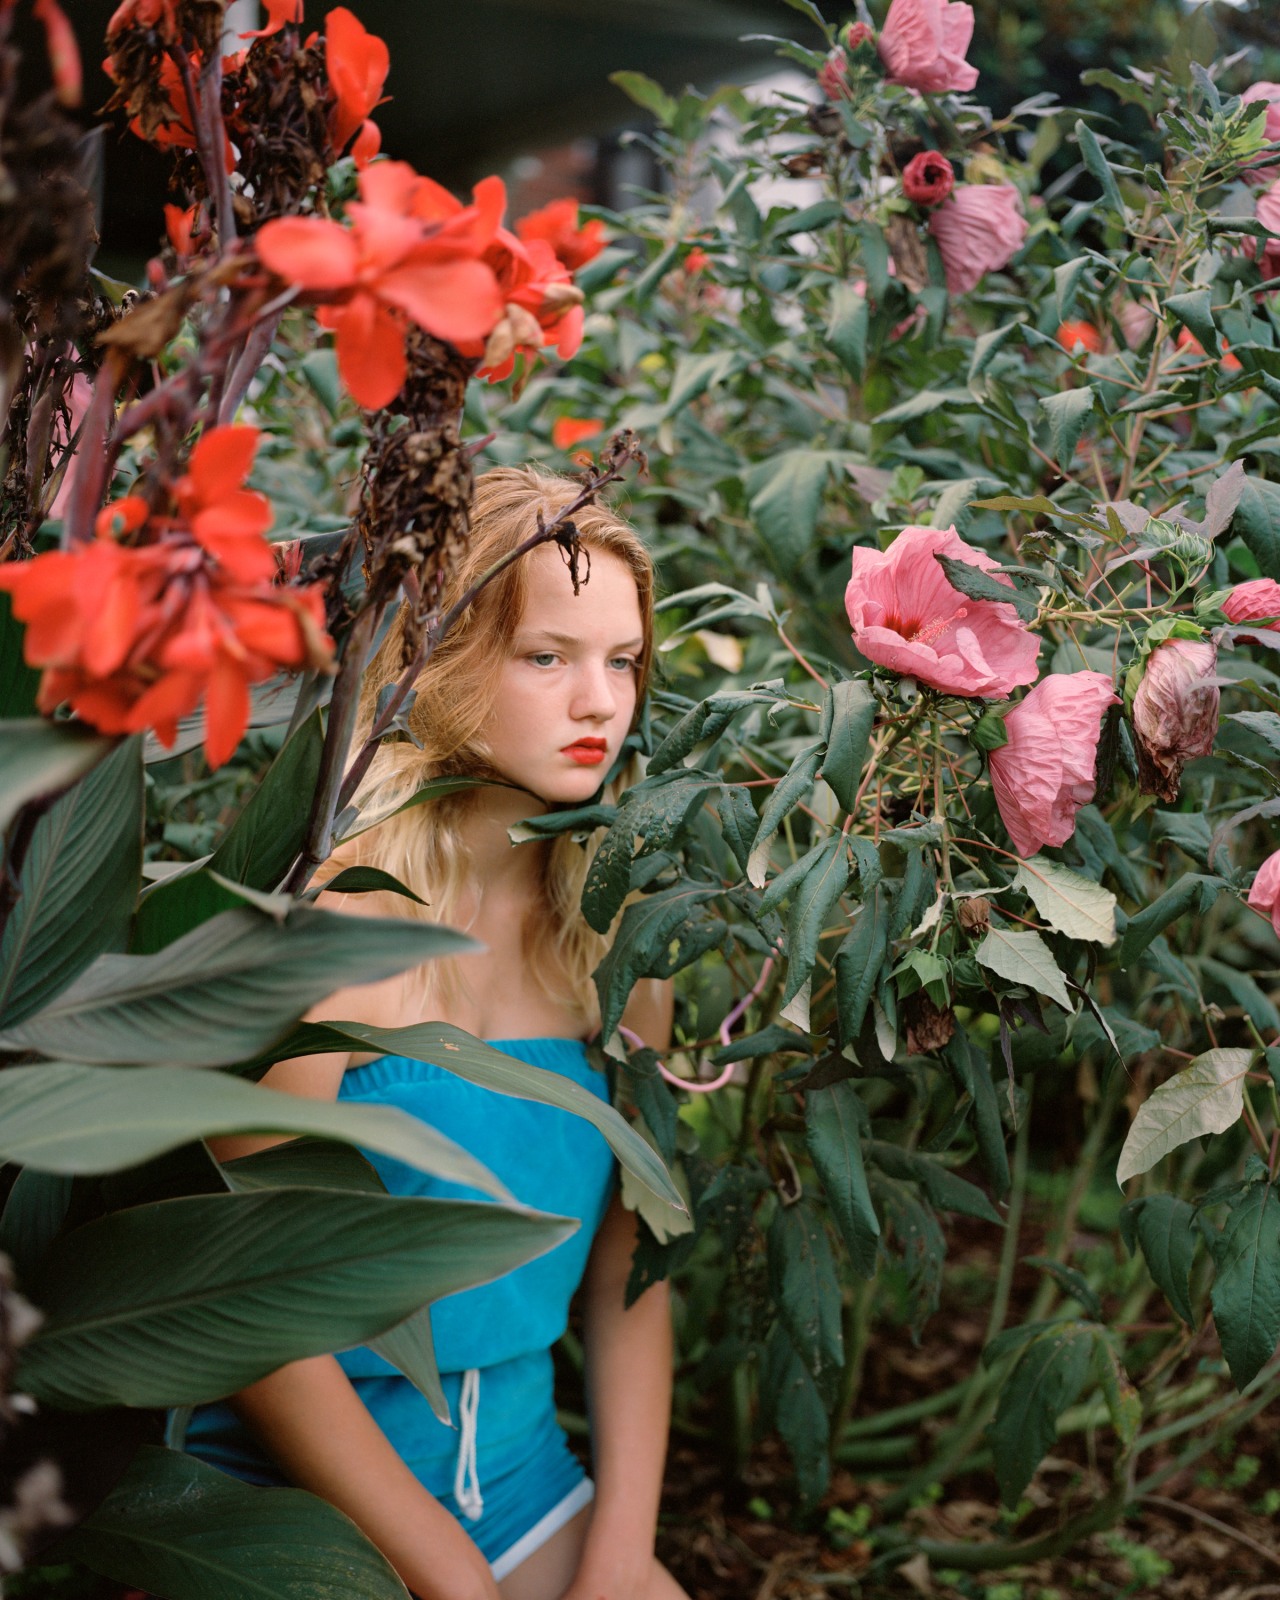 A young girl in a teal romper wears bring reddish-orange lipstick and sits amongst tall colorful flowers while staring into the near-distance.